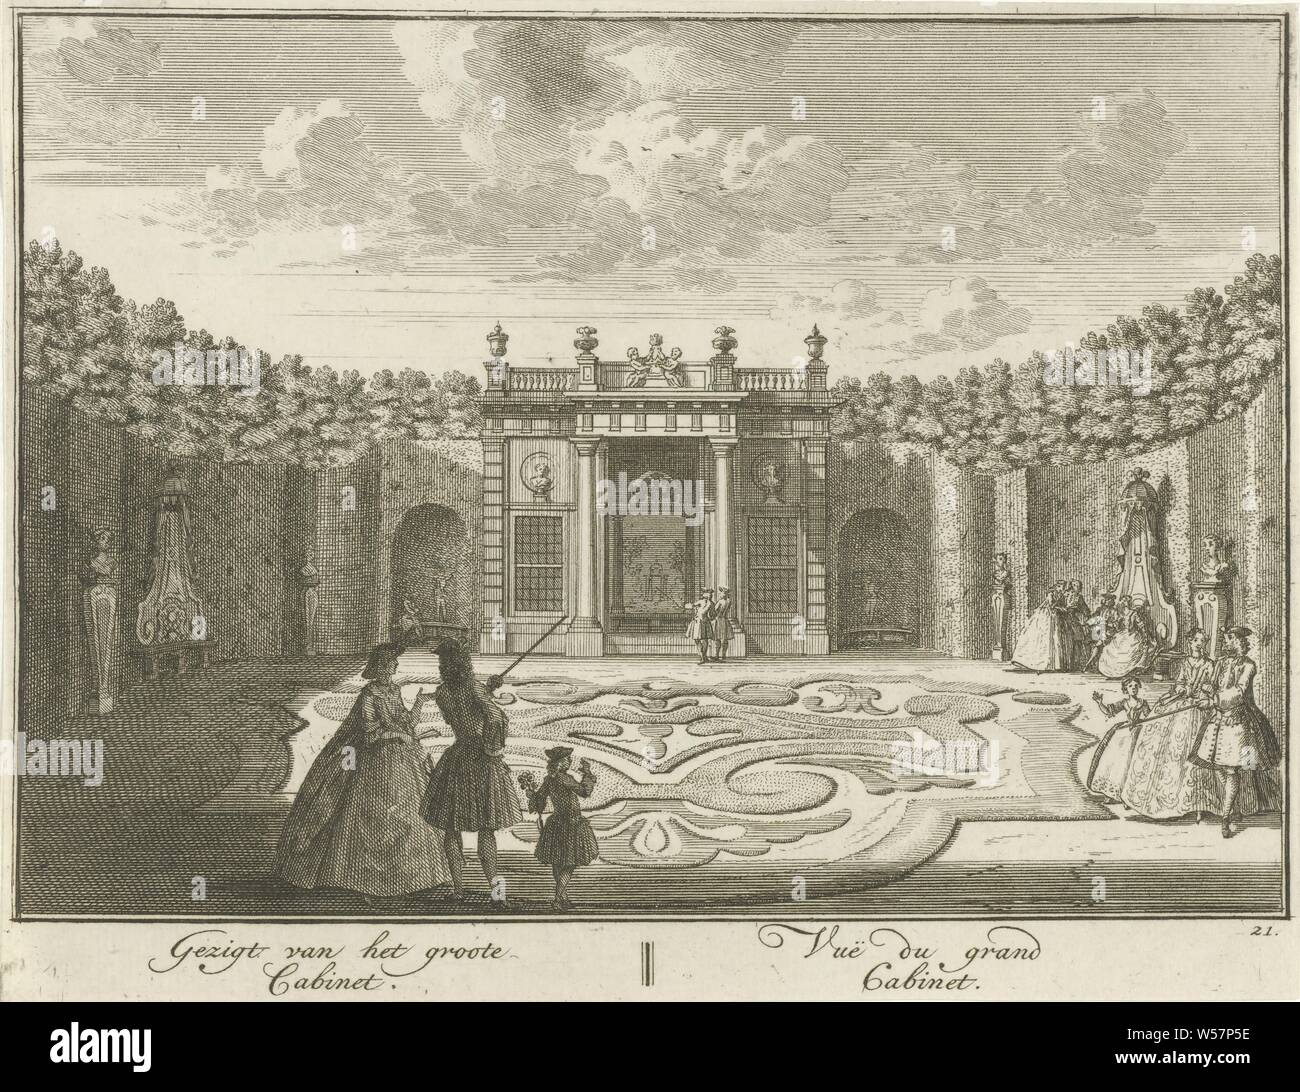 Cabinet in the garden of Huis ter Meer in Maarssen View of the large Cabinet / Vue du grand Cabinet (title on object) The Oud Adelyk huys and Ridderhofstad Ter Meer (series title), View on the cabinet in the French garden of Huis ter Meer. Groups of figures walk in the garden. The print is part of a series with 26 faces on Huis ter Meer and the accompanying estate in Maarssen, country house, French or architectonic garden, formal garden, Huis Ter Meer, Hendrik de Leth, c. 1740, paper, etching, h 155 mm × w 200 mm Stock Photo